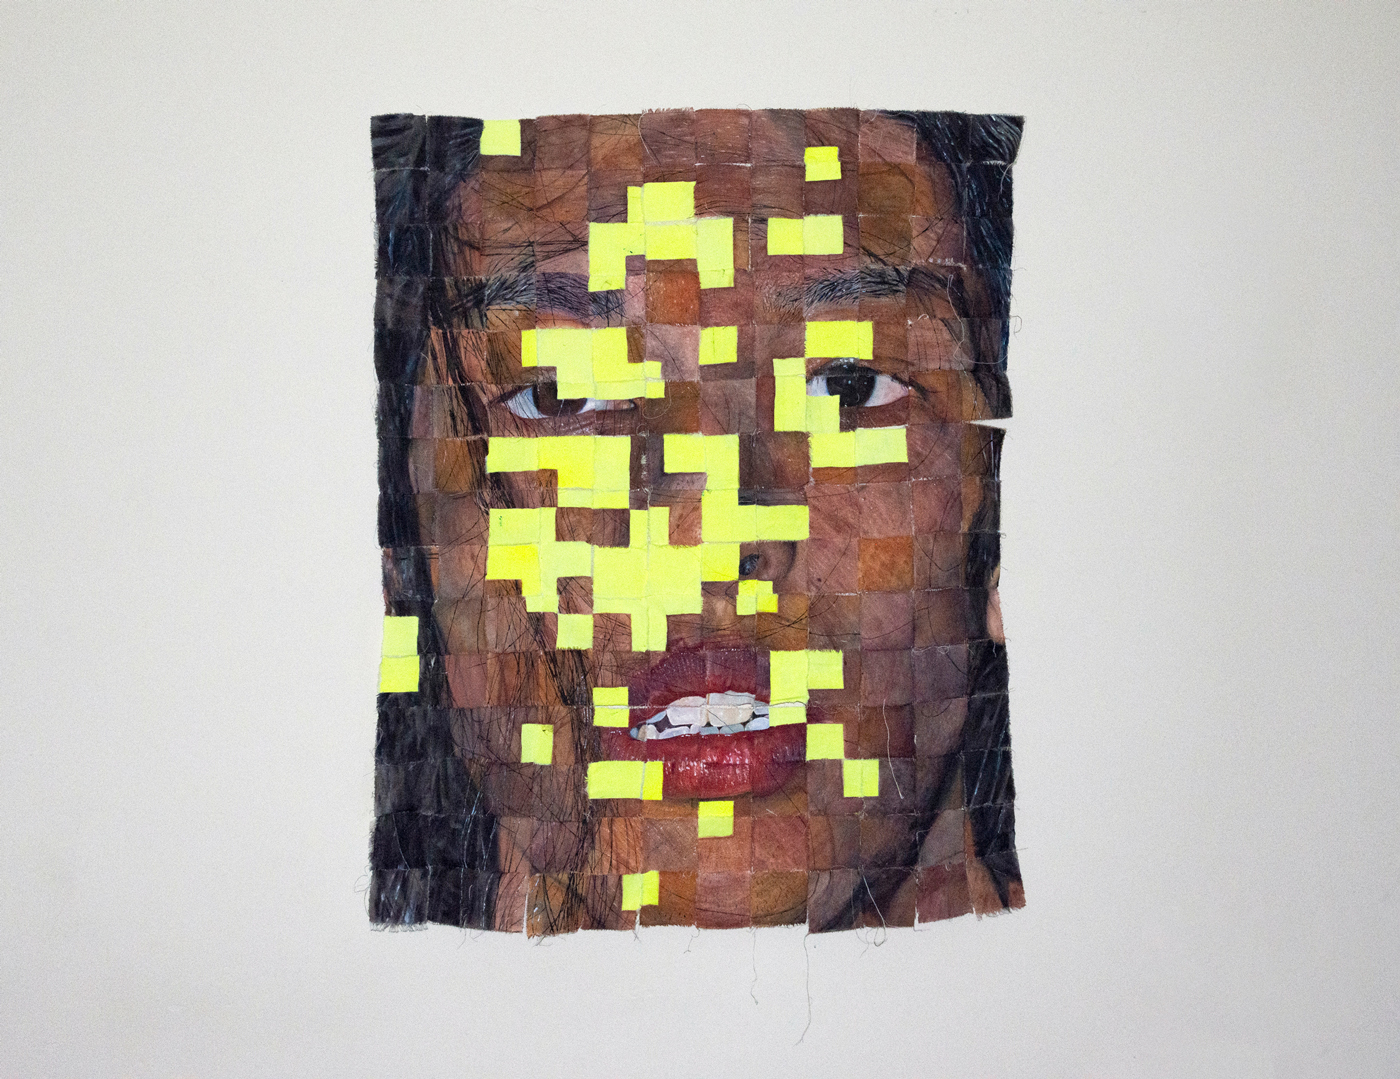 a self-portrait of the artist painted on 180 squares stitched together. various squares of bright yellow mask the face